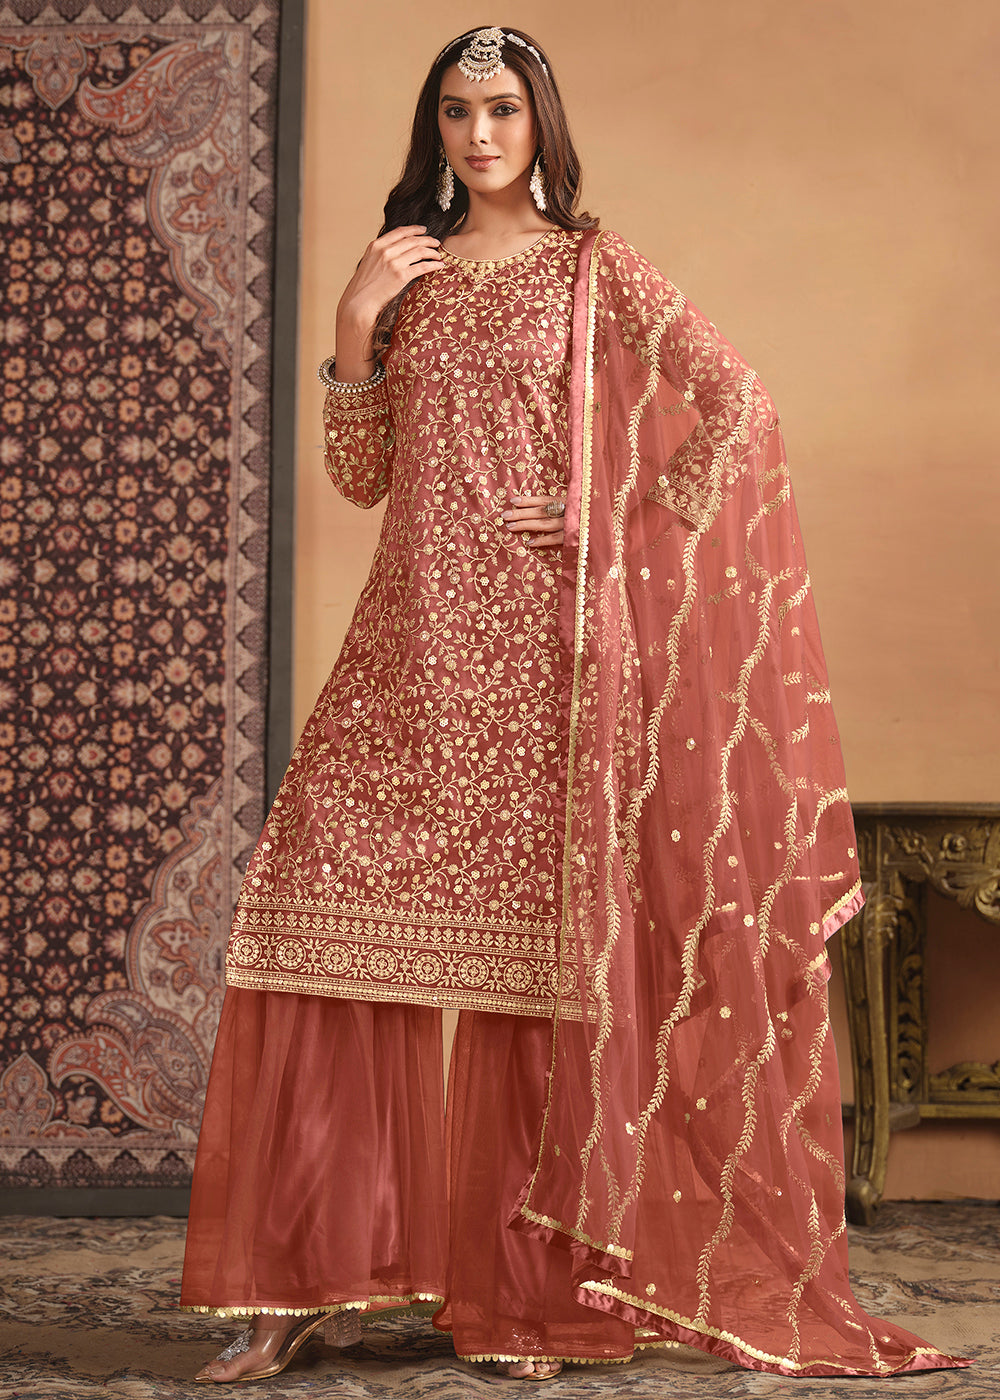 Shop Now Net Rust Orange Embroidered Gharara Style Suit Online at Empress Clothing in USA, UK, Canada, Italy & Worldwide.